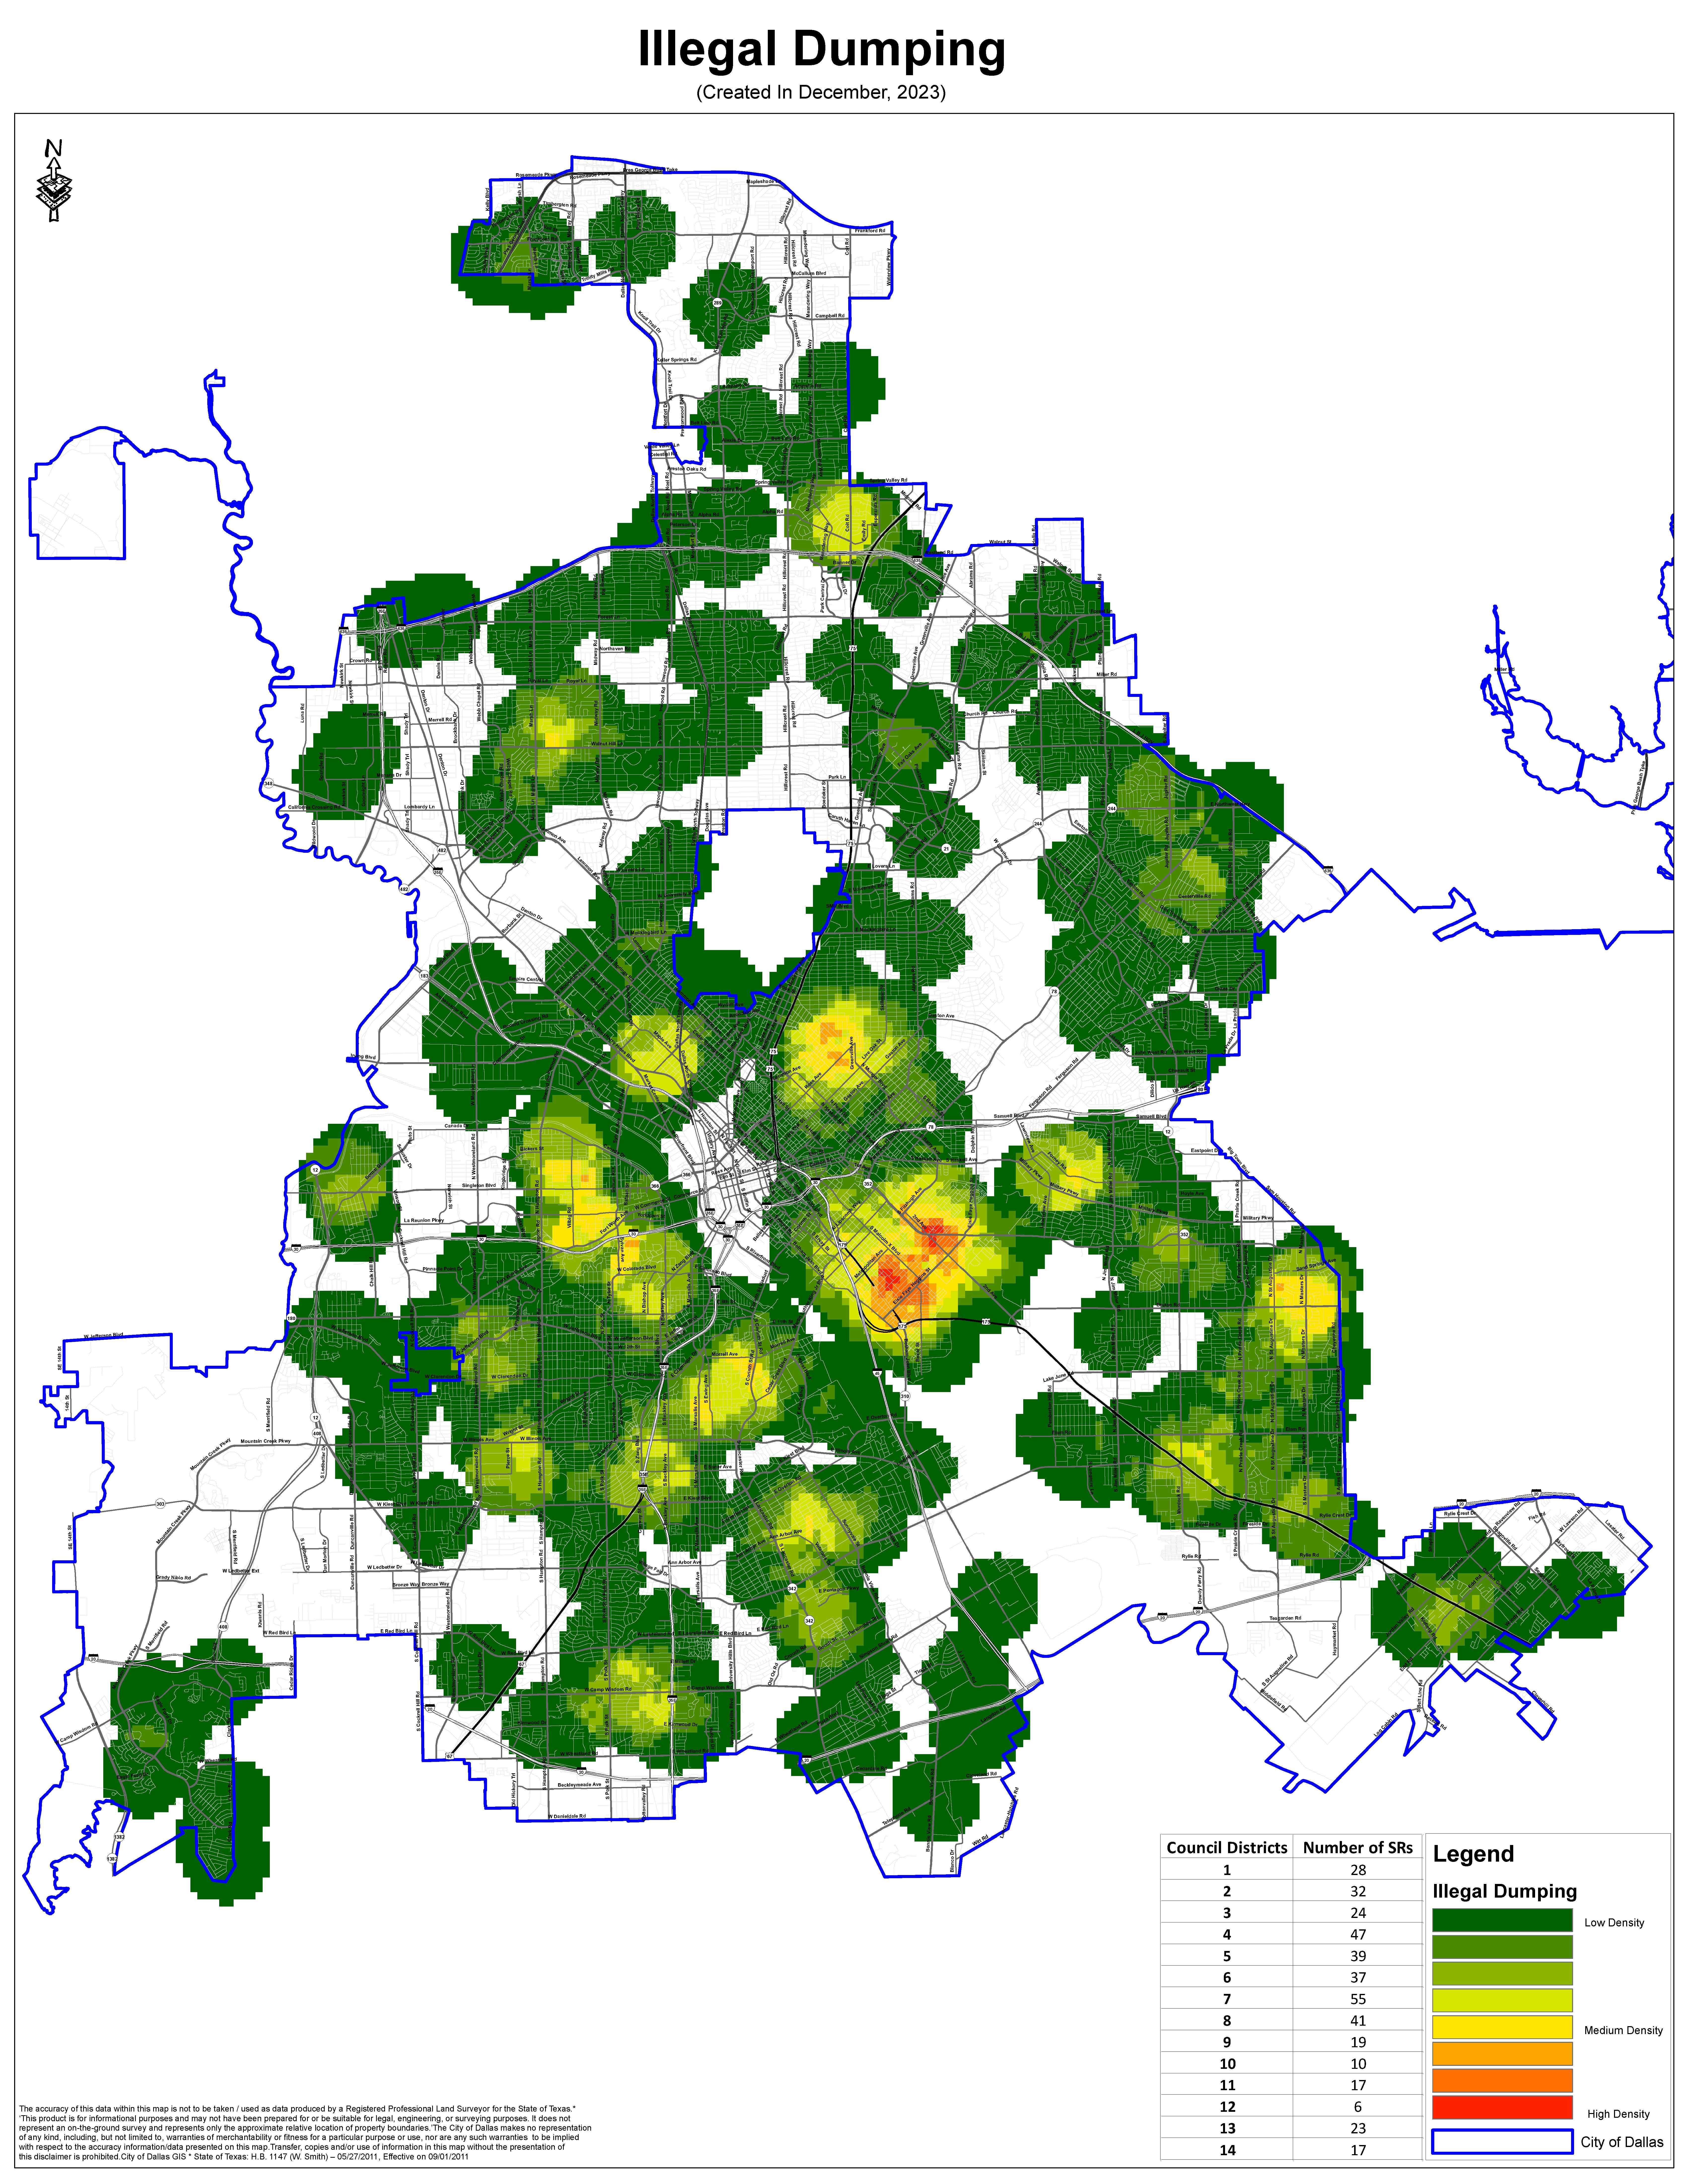 Illegal Dumping Service Request Heat Map for March 2022.png